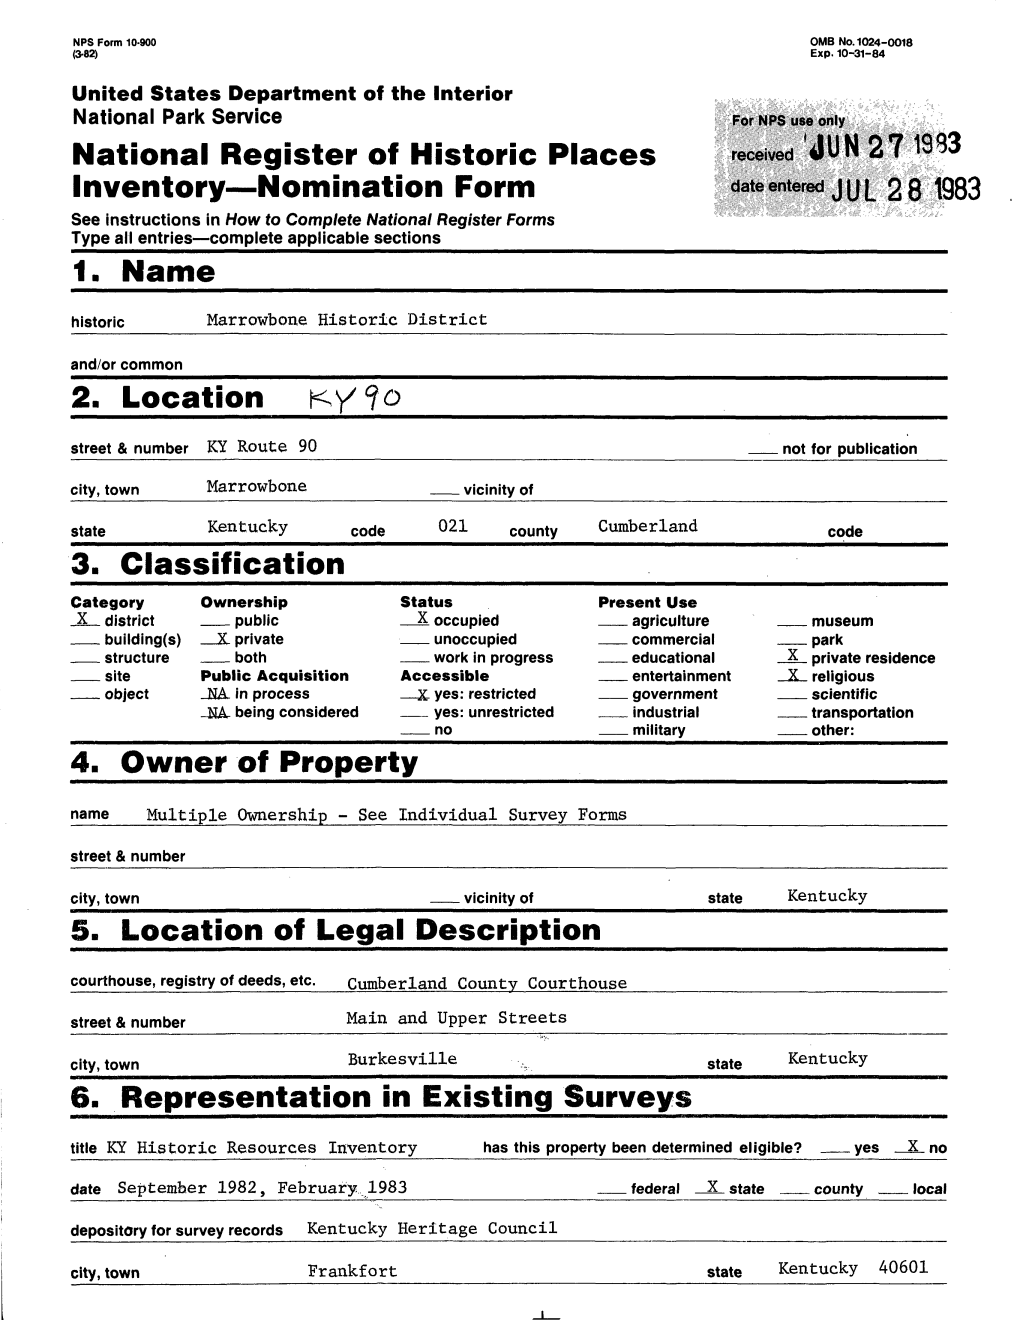 National Register of Historic Places Inventory Nomination Form 1. Name 2. Location R-Y'9o 3. Classification 4. Owner of Propert